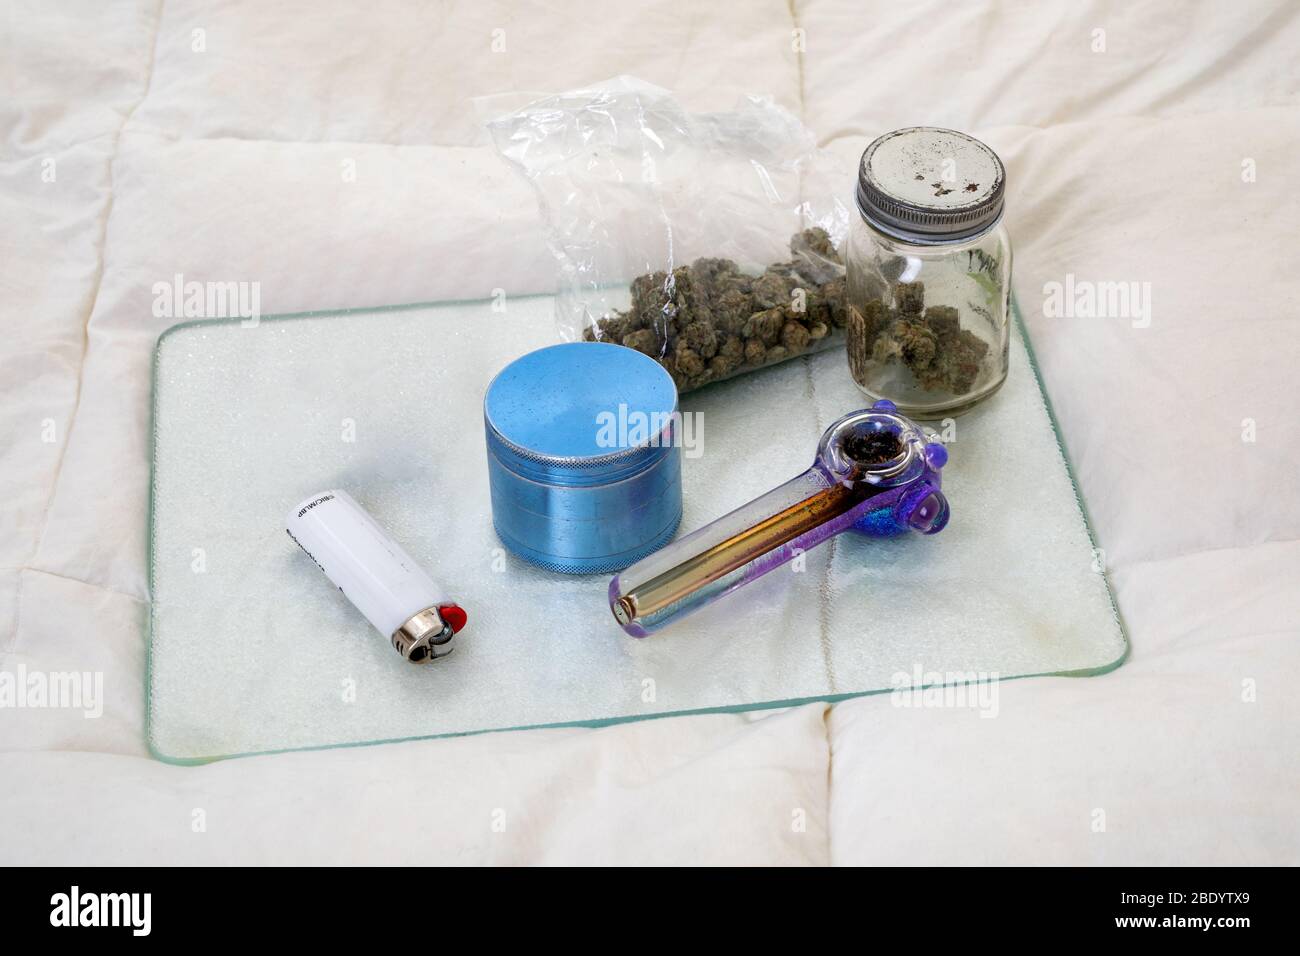 Assortment of Cannabis Paraphernalia and Dried Flower Buds Stock Photo